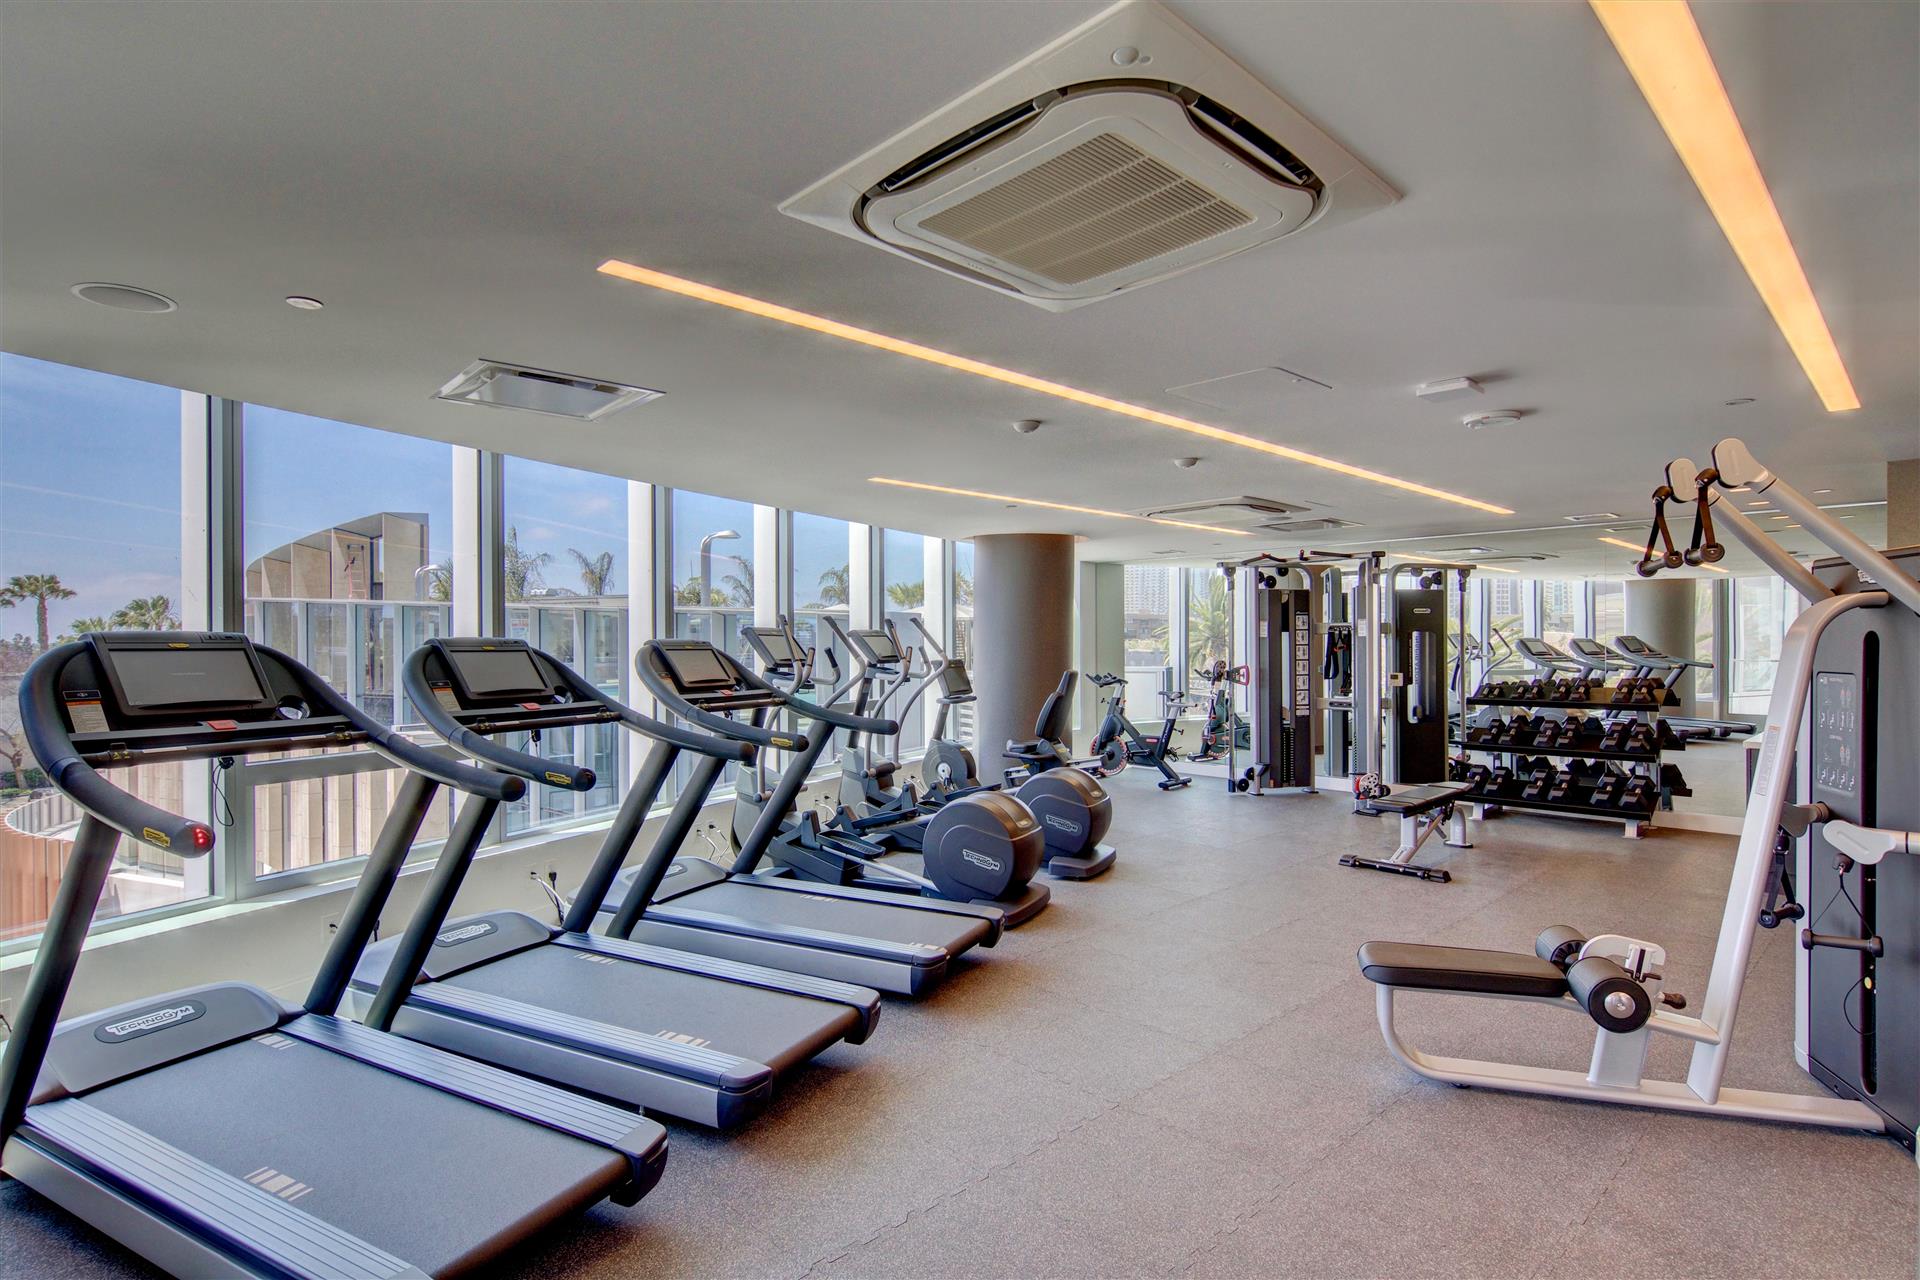 Fitness Center located on fourth floor of high rise tower